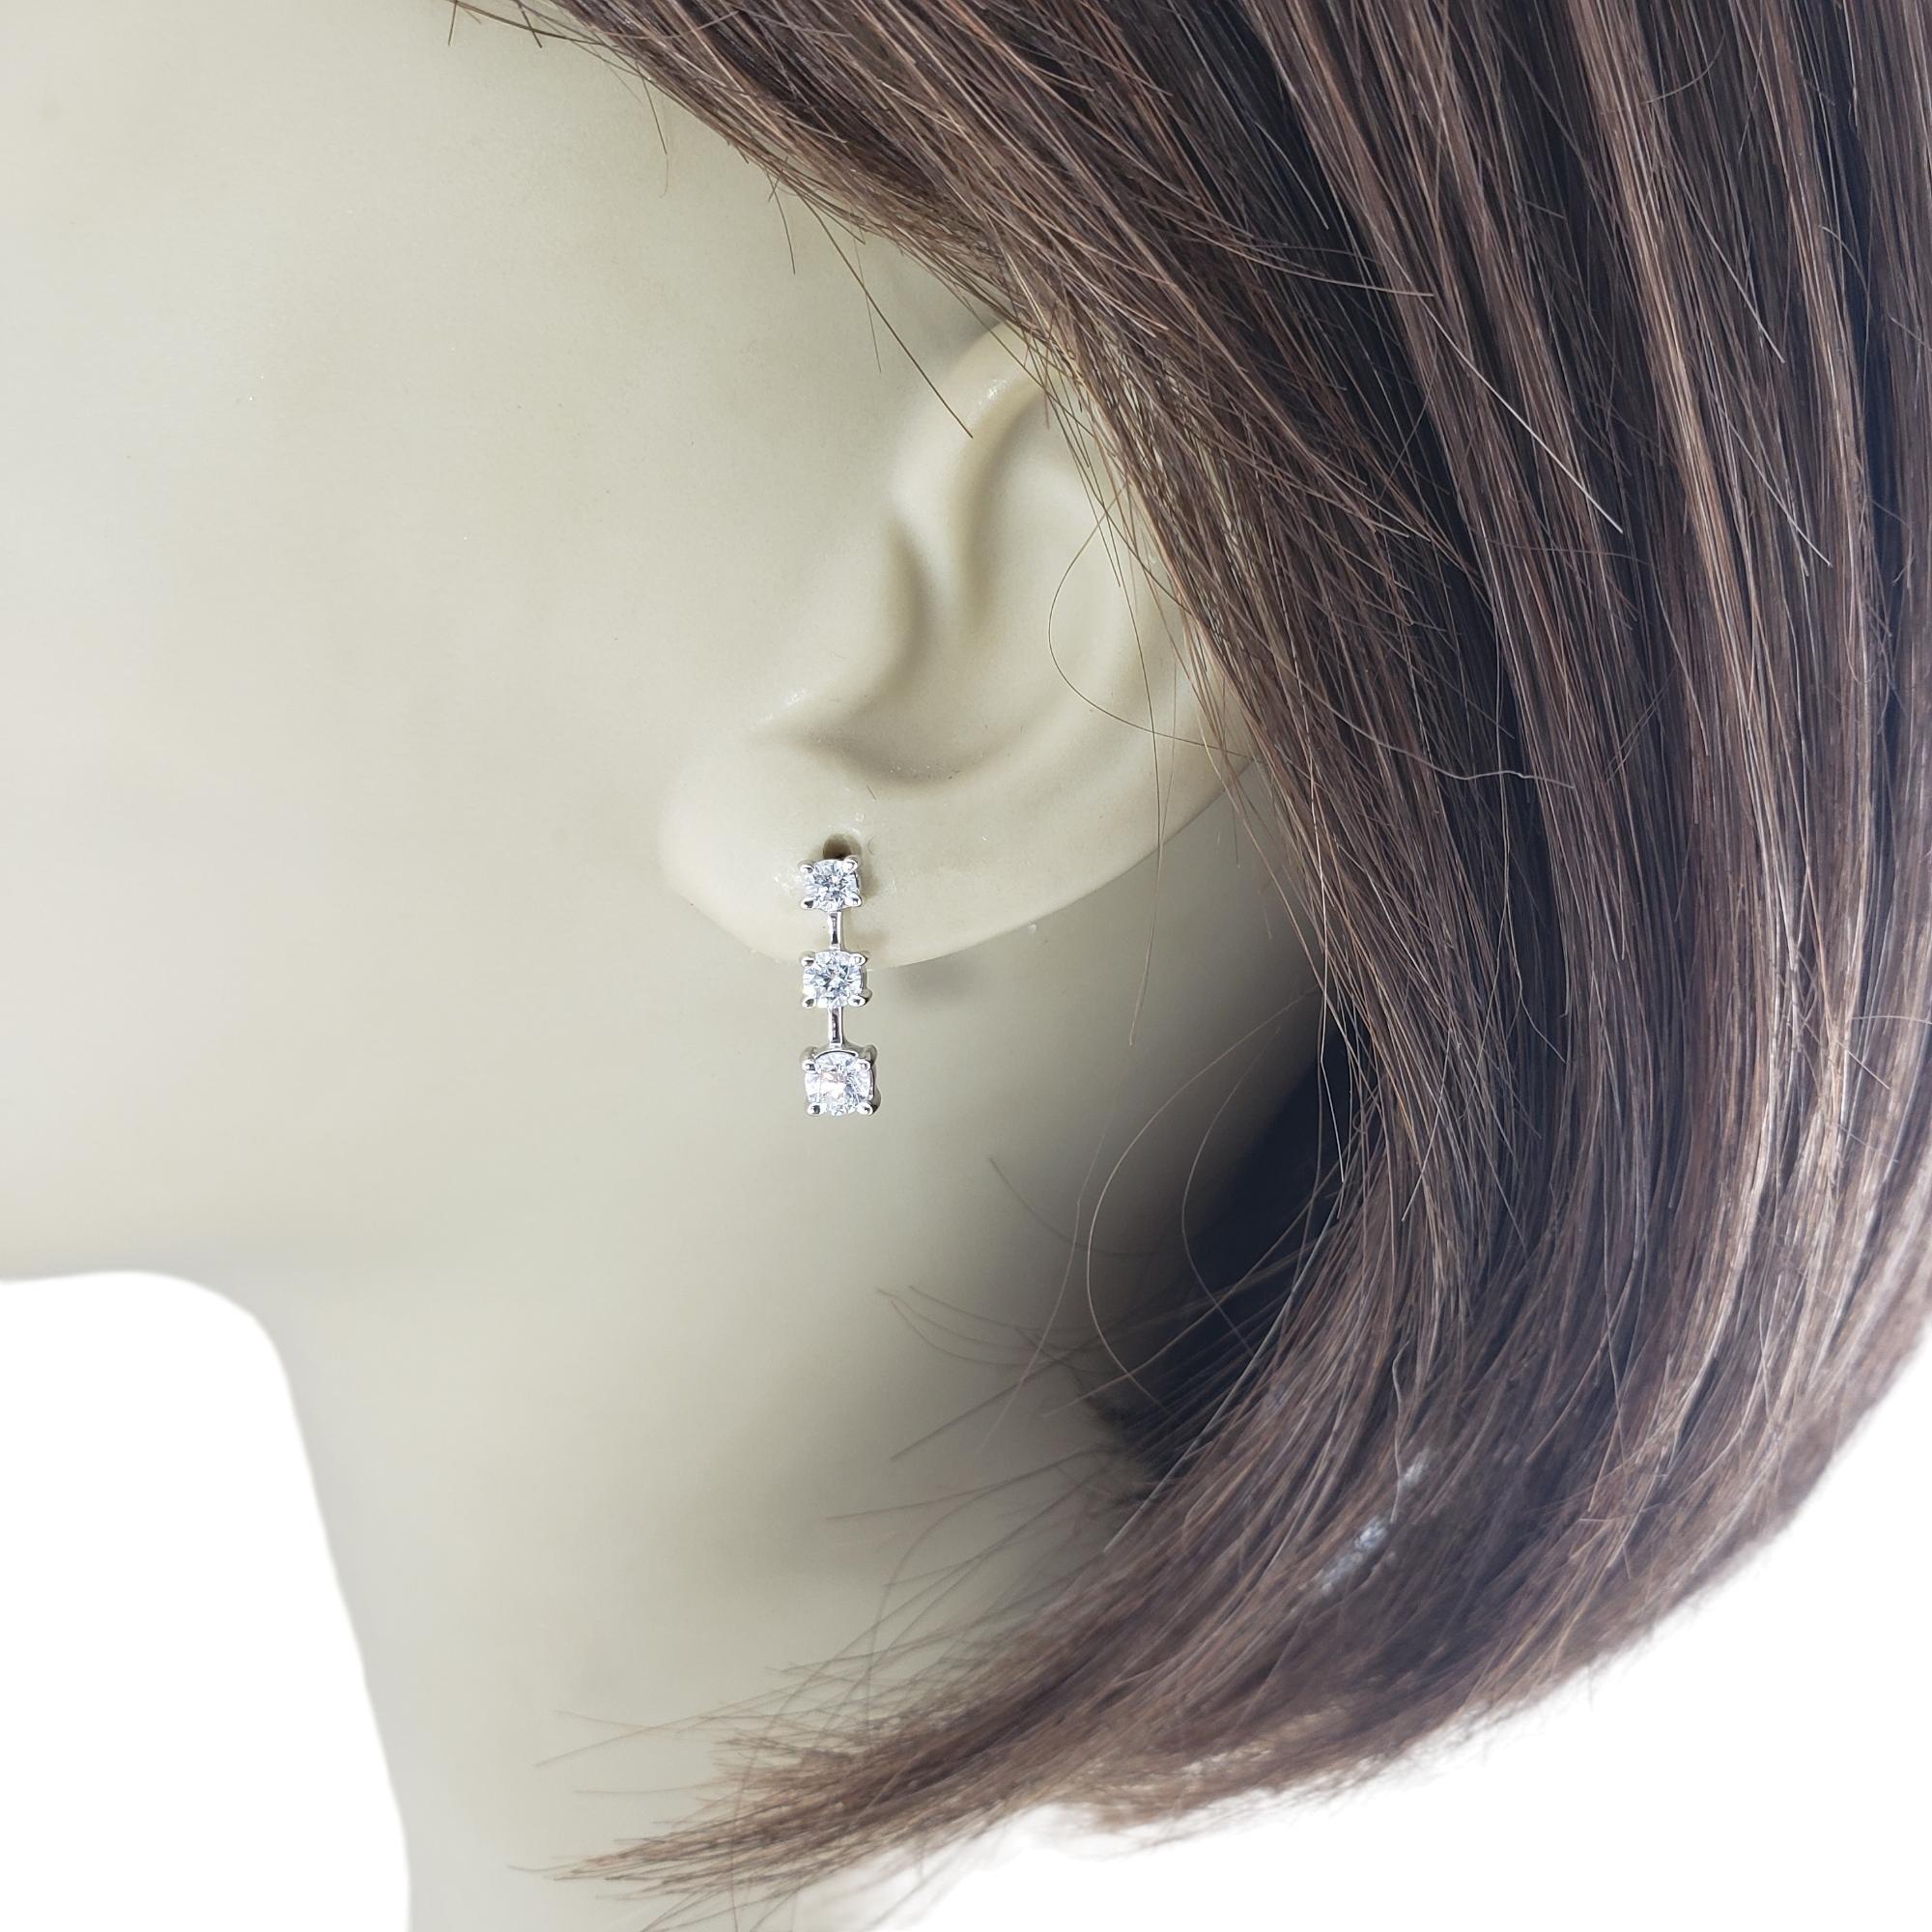 14 Karat White Gold and Diamond Drop Earrings #15316 For Sale 2